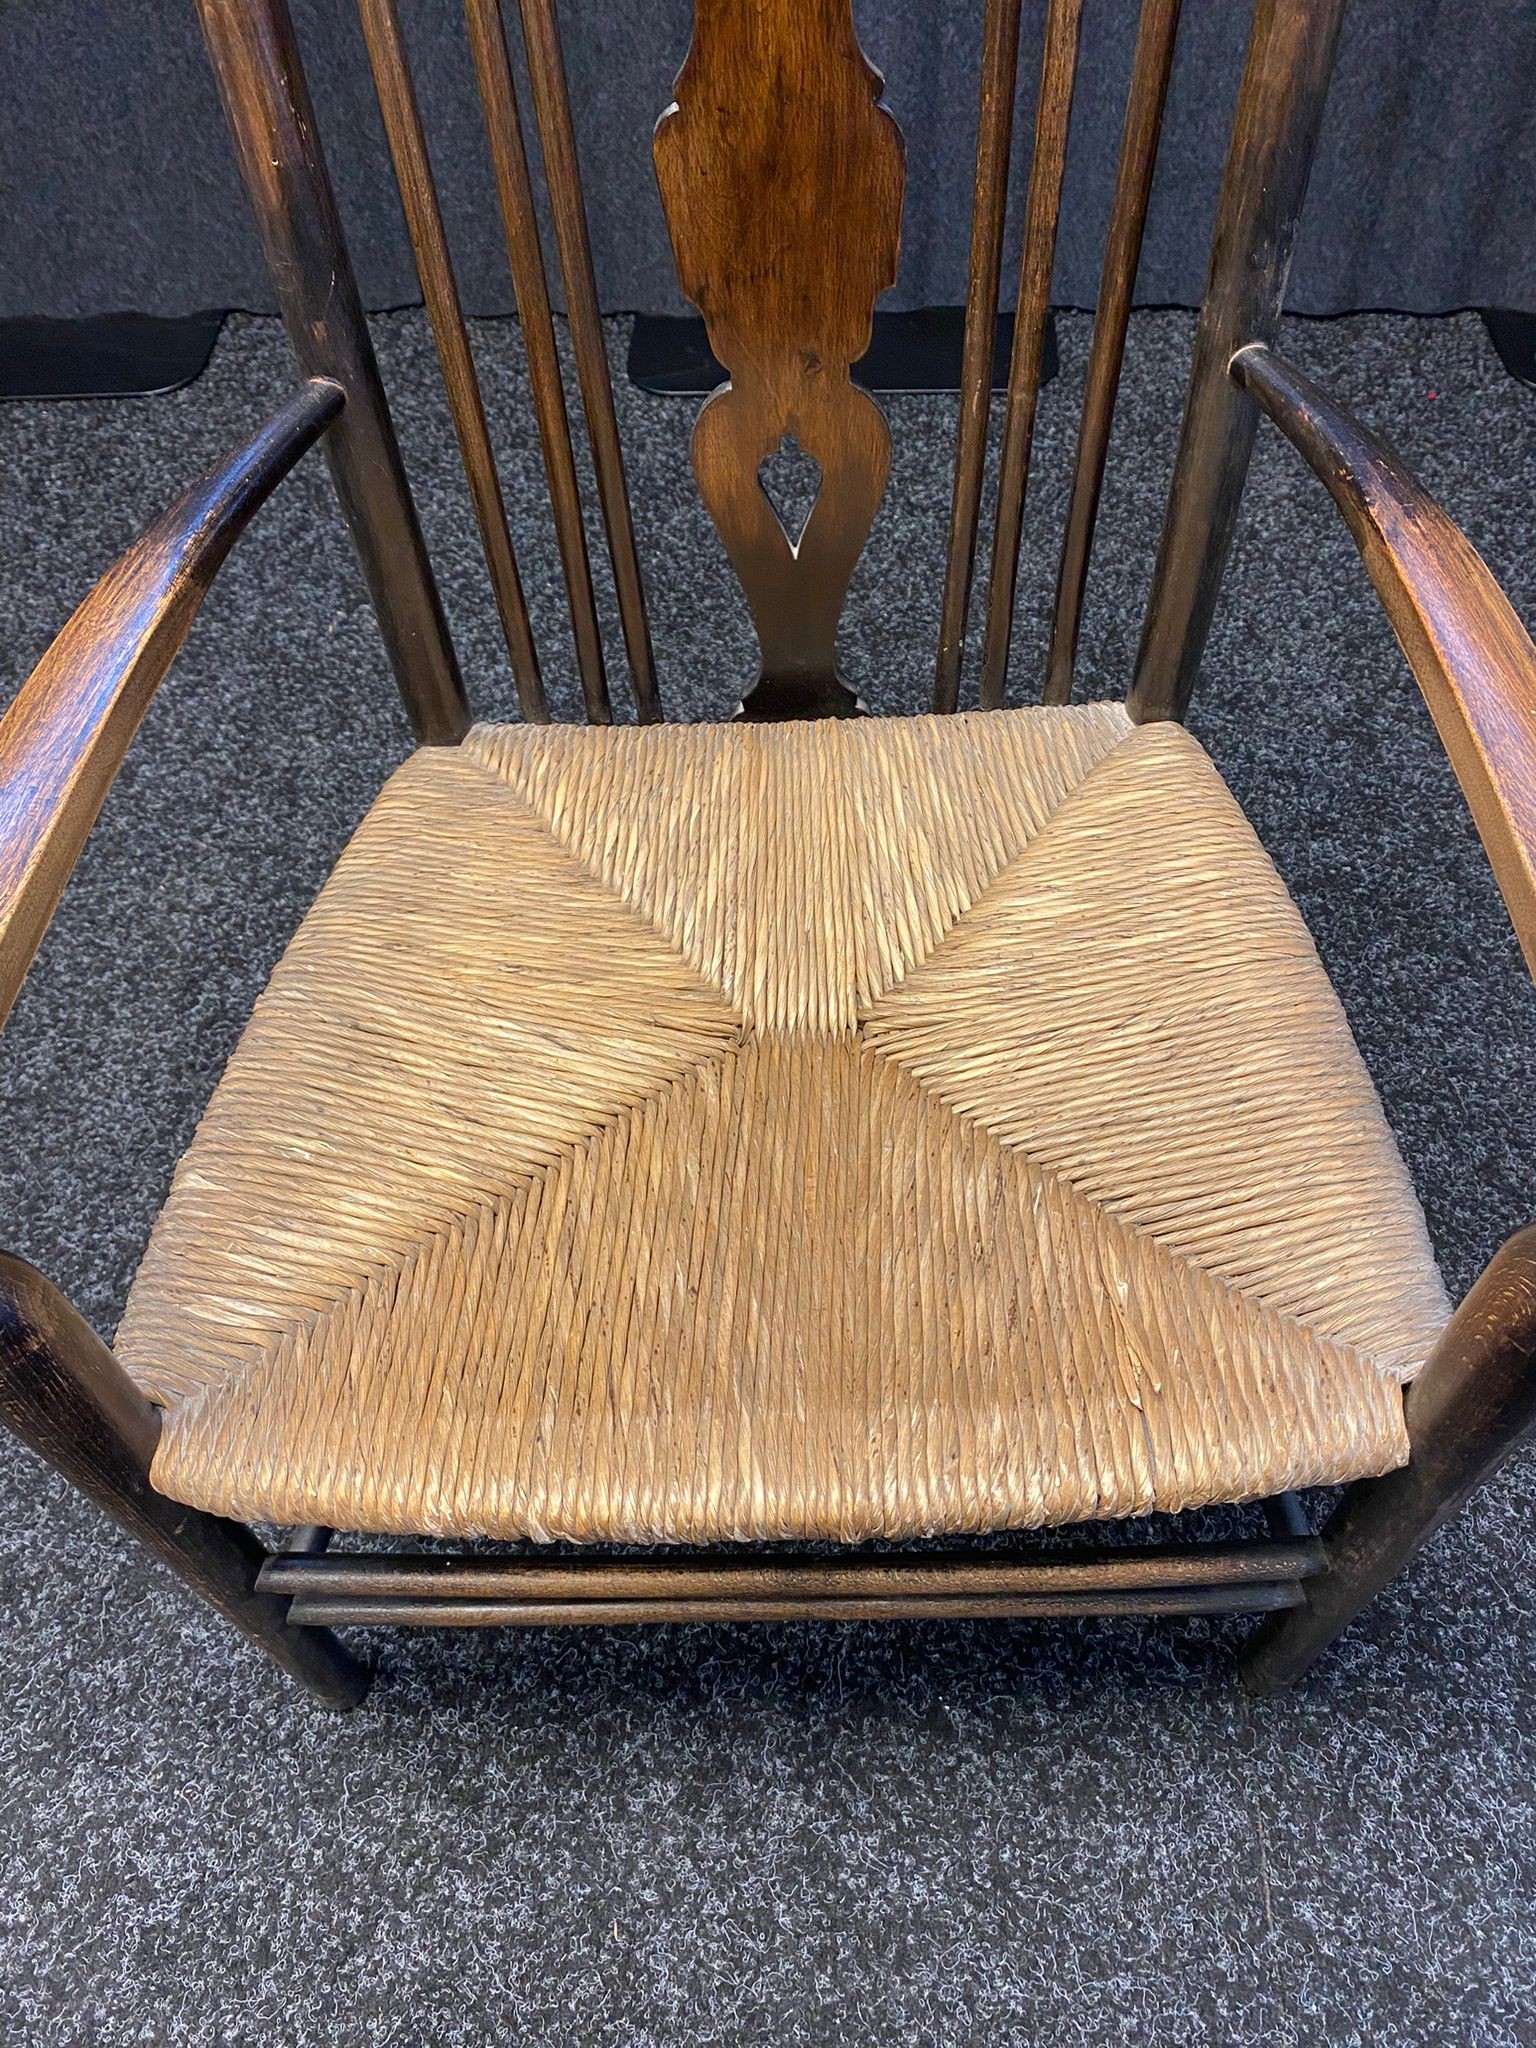 Arts & Crafts chair, weaved seat, turned legs [87cm] - Image 2 of 5